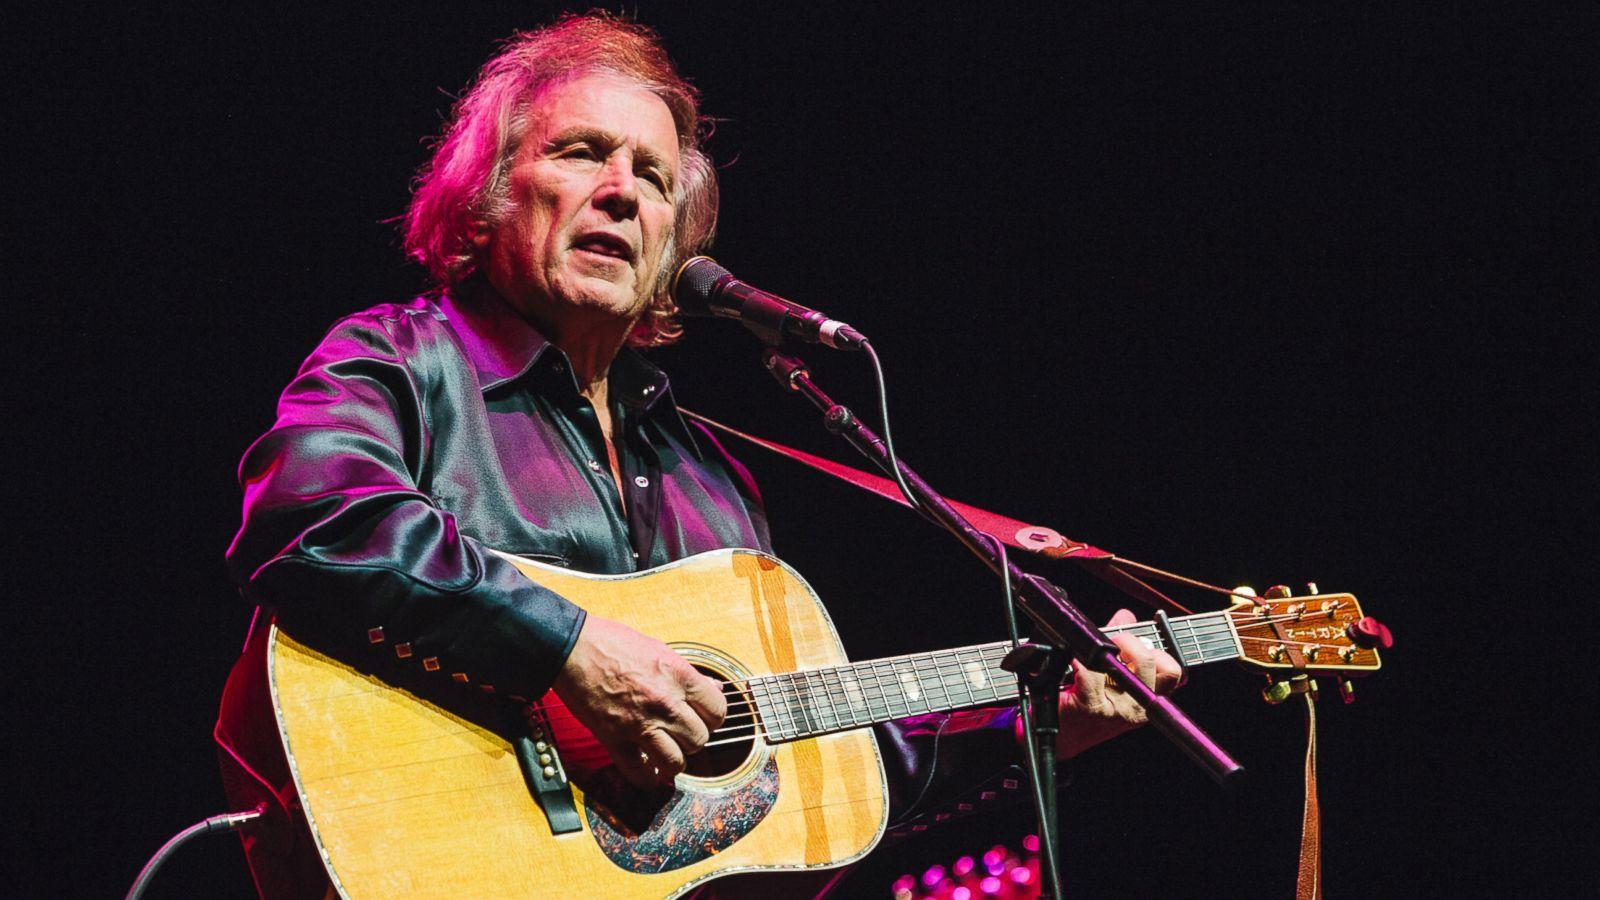 Don McLean's Wife Is Granted a Temporary Protection Order